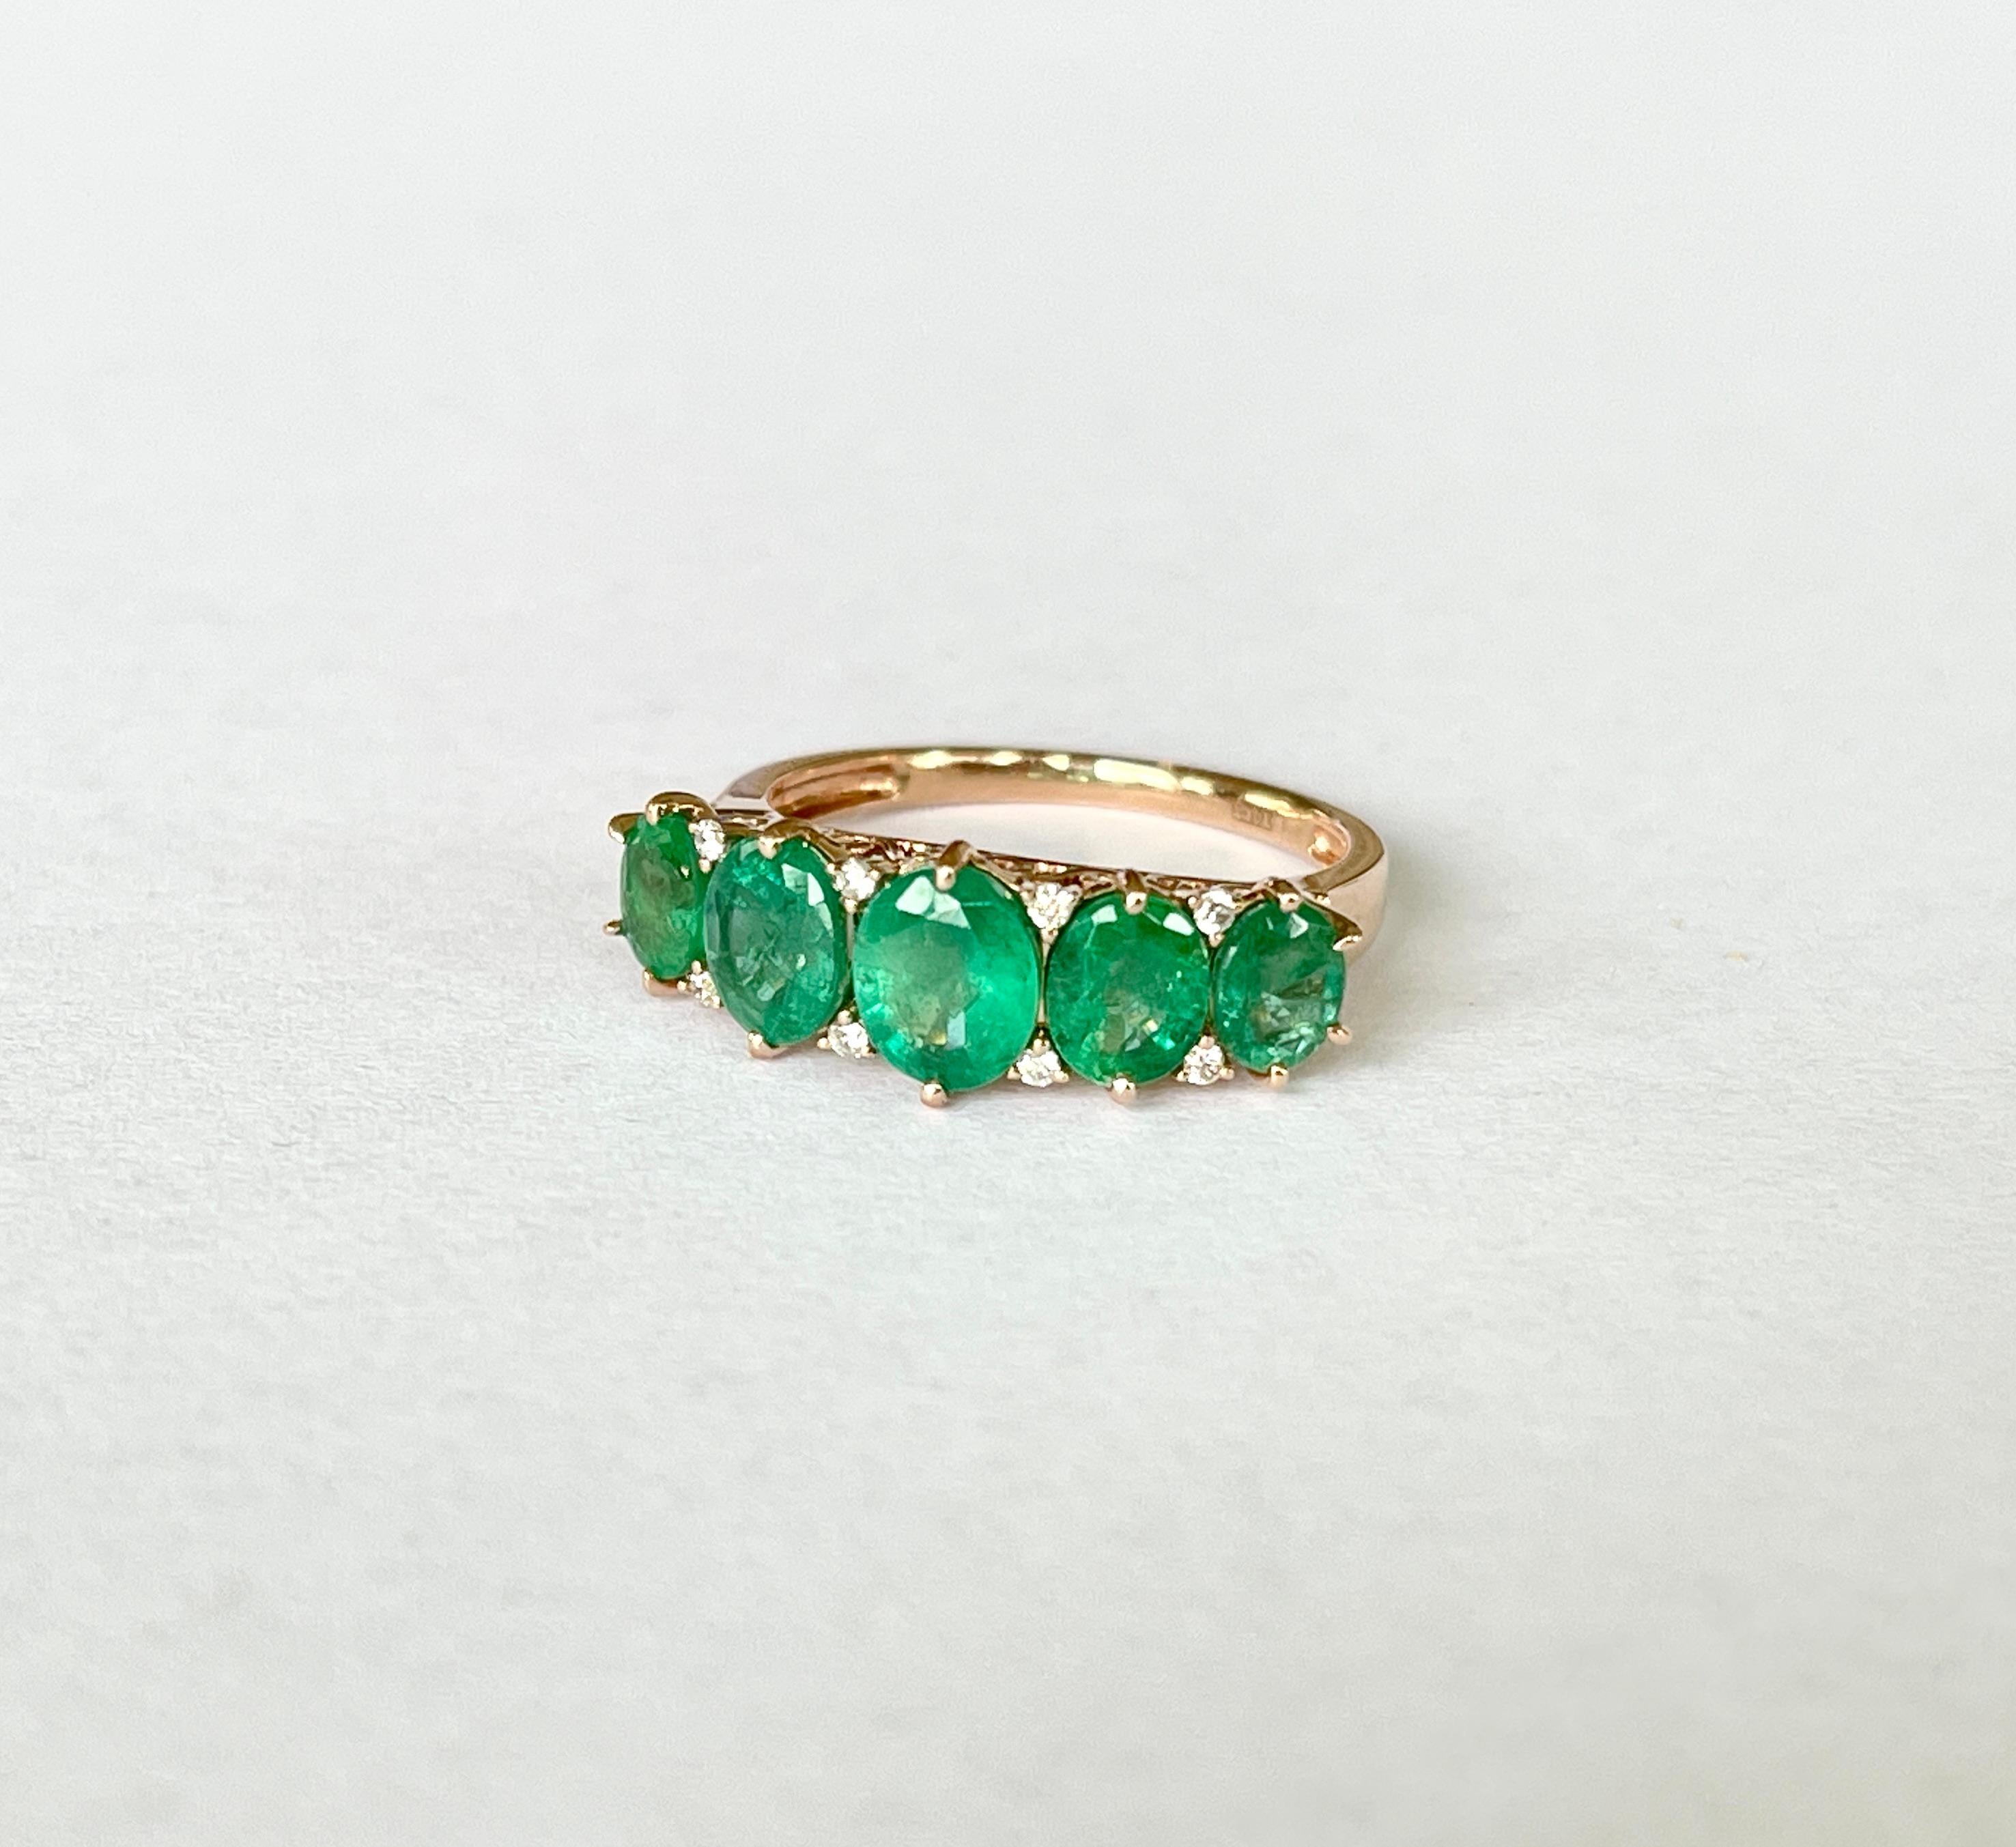 LOVELY, CLASSIC STYLE EMERALD BRIDGE RING

This beautiful ring is set with 5 x bright green Natural Emeralds and tiny Diamonds. The Emeralds are oval cut and graduate in size, bridging across the finger. Together they weigh approximately 2.67ct. The